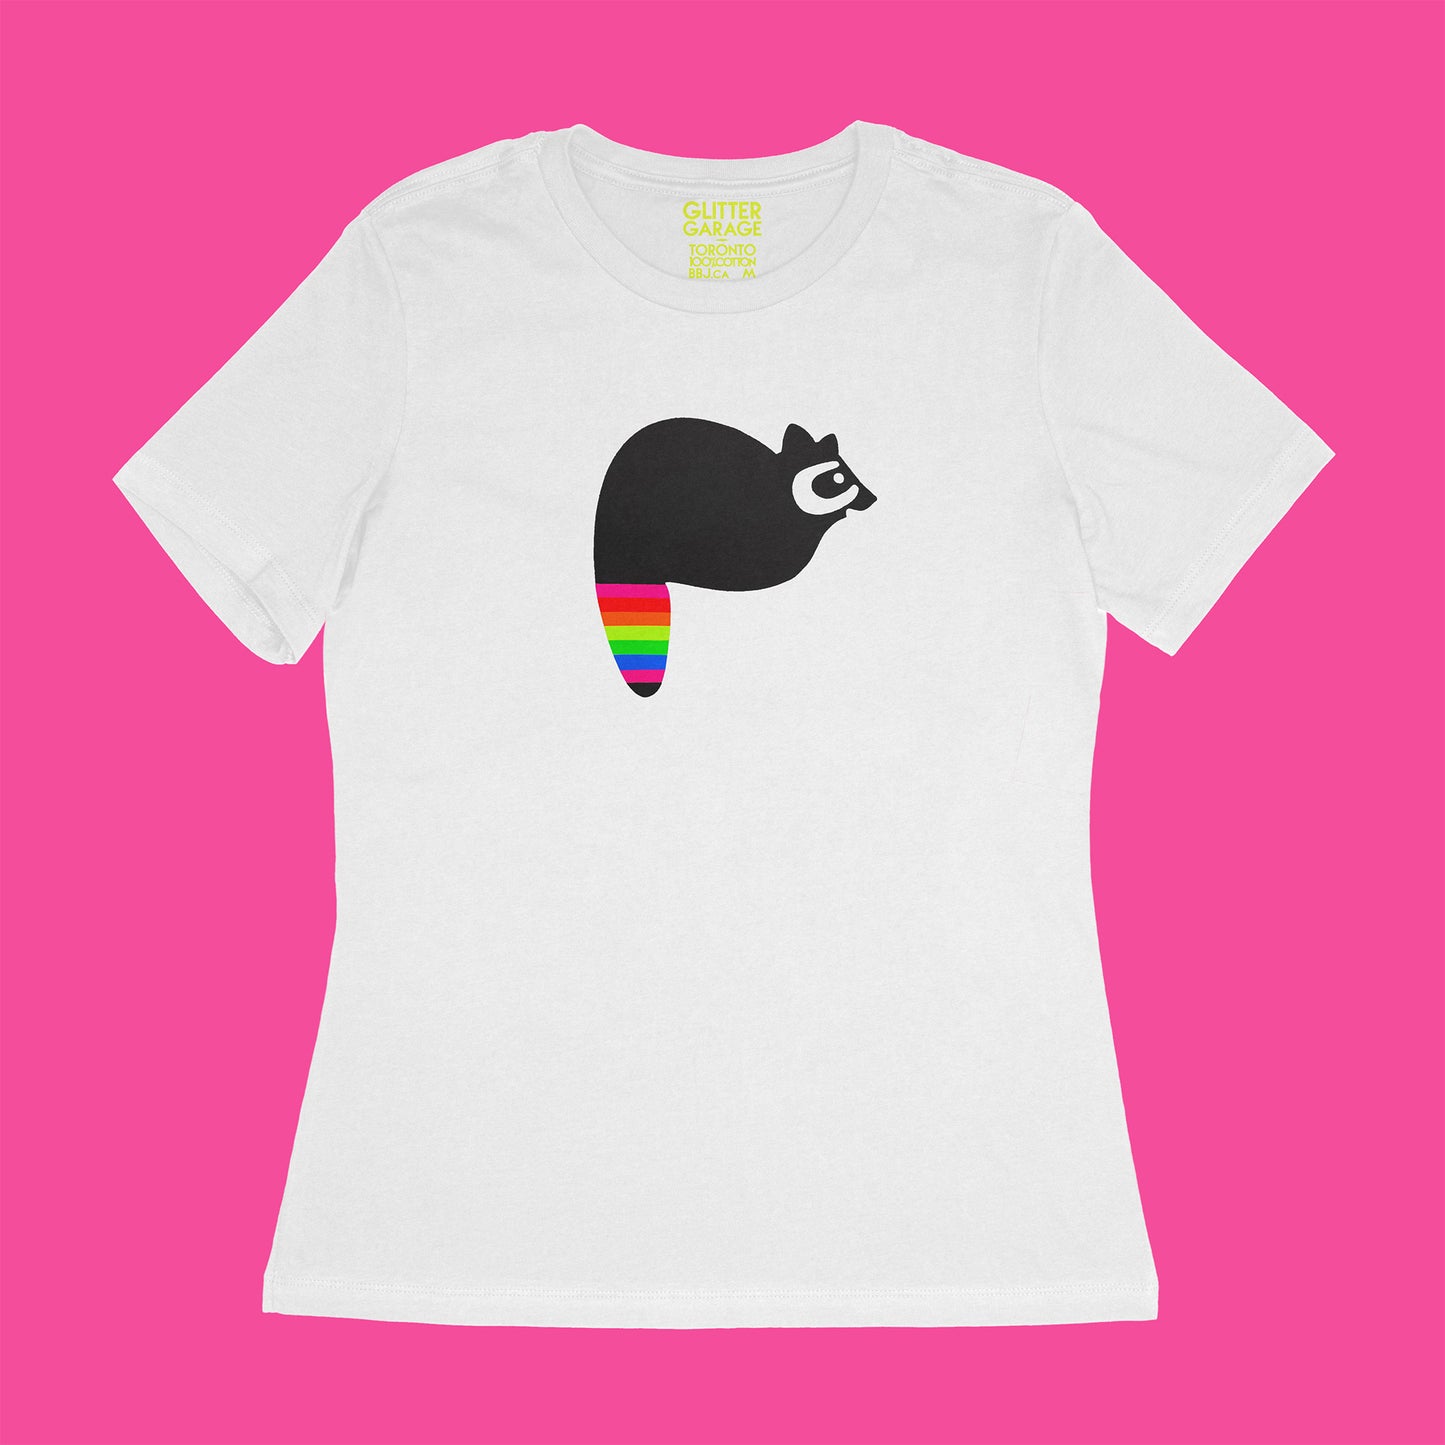 fuzzy black raccoon with neon rainbow striped tail on white women's relaxed fit tee by BBJ / Glitter Garage